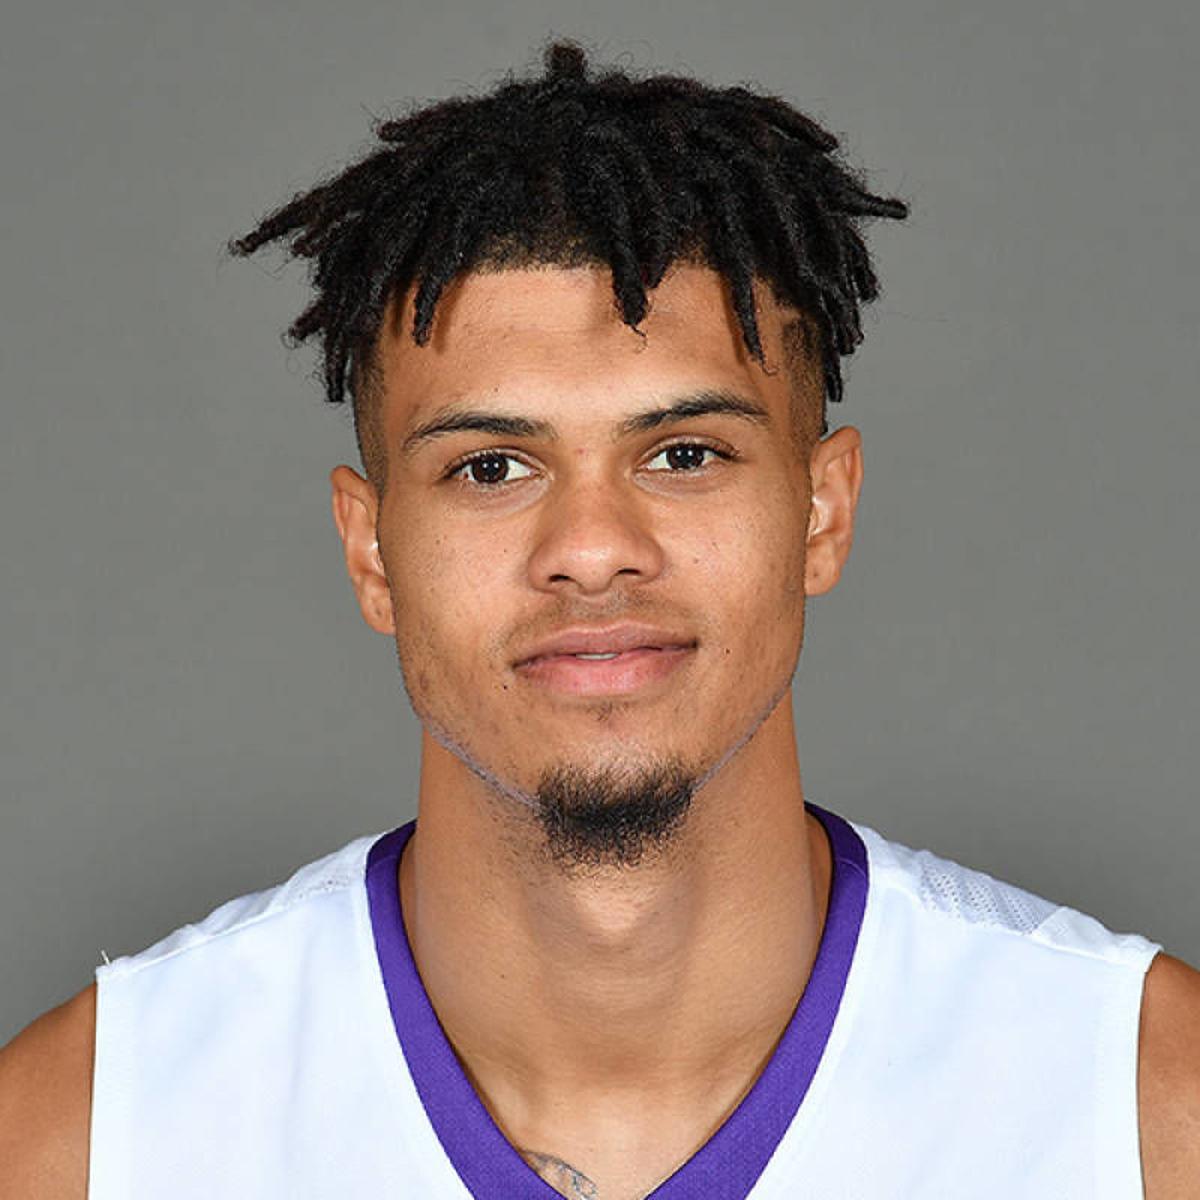 Lsu Basketball Player Wayde Sims Fatally Shot In Head During Fight